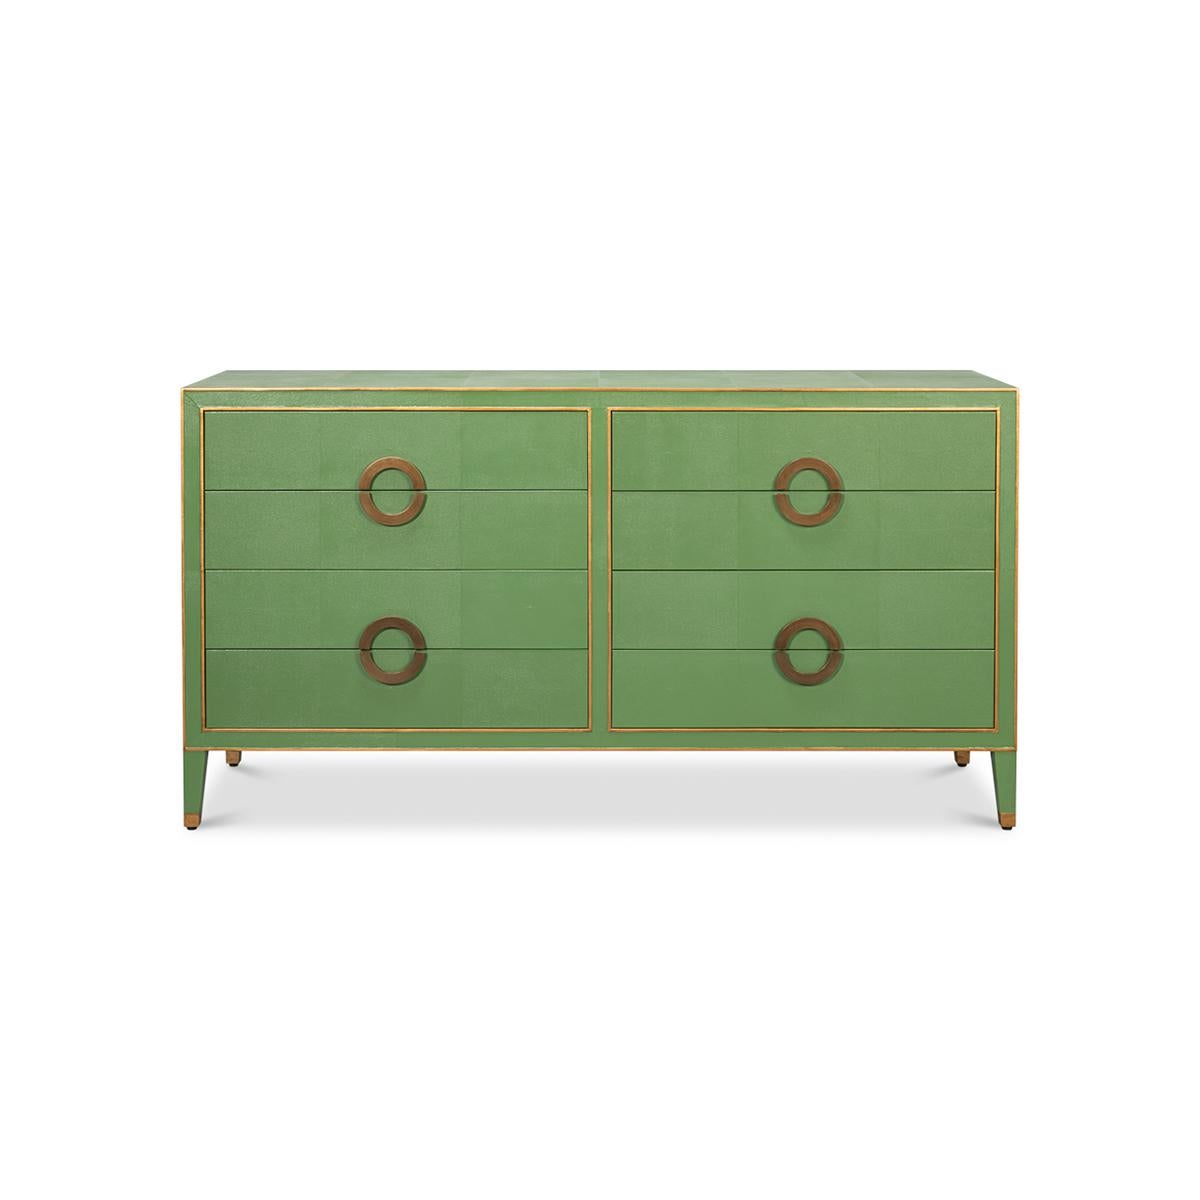 This exquisite piece features a rich green shagreen embossed leather, which exudes an air of sophistication and luxury. The dresser is adorned with elegant gold ring handles and trim, adding a touch of glamour to its overall design.

With eight